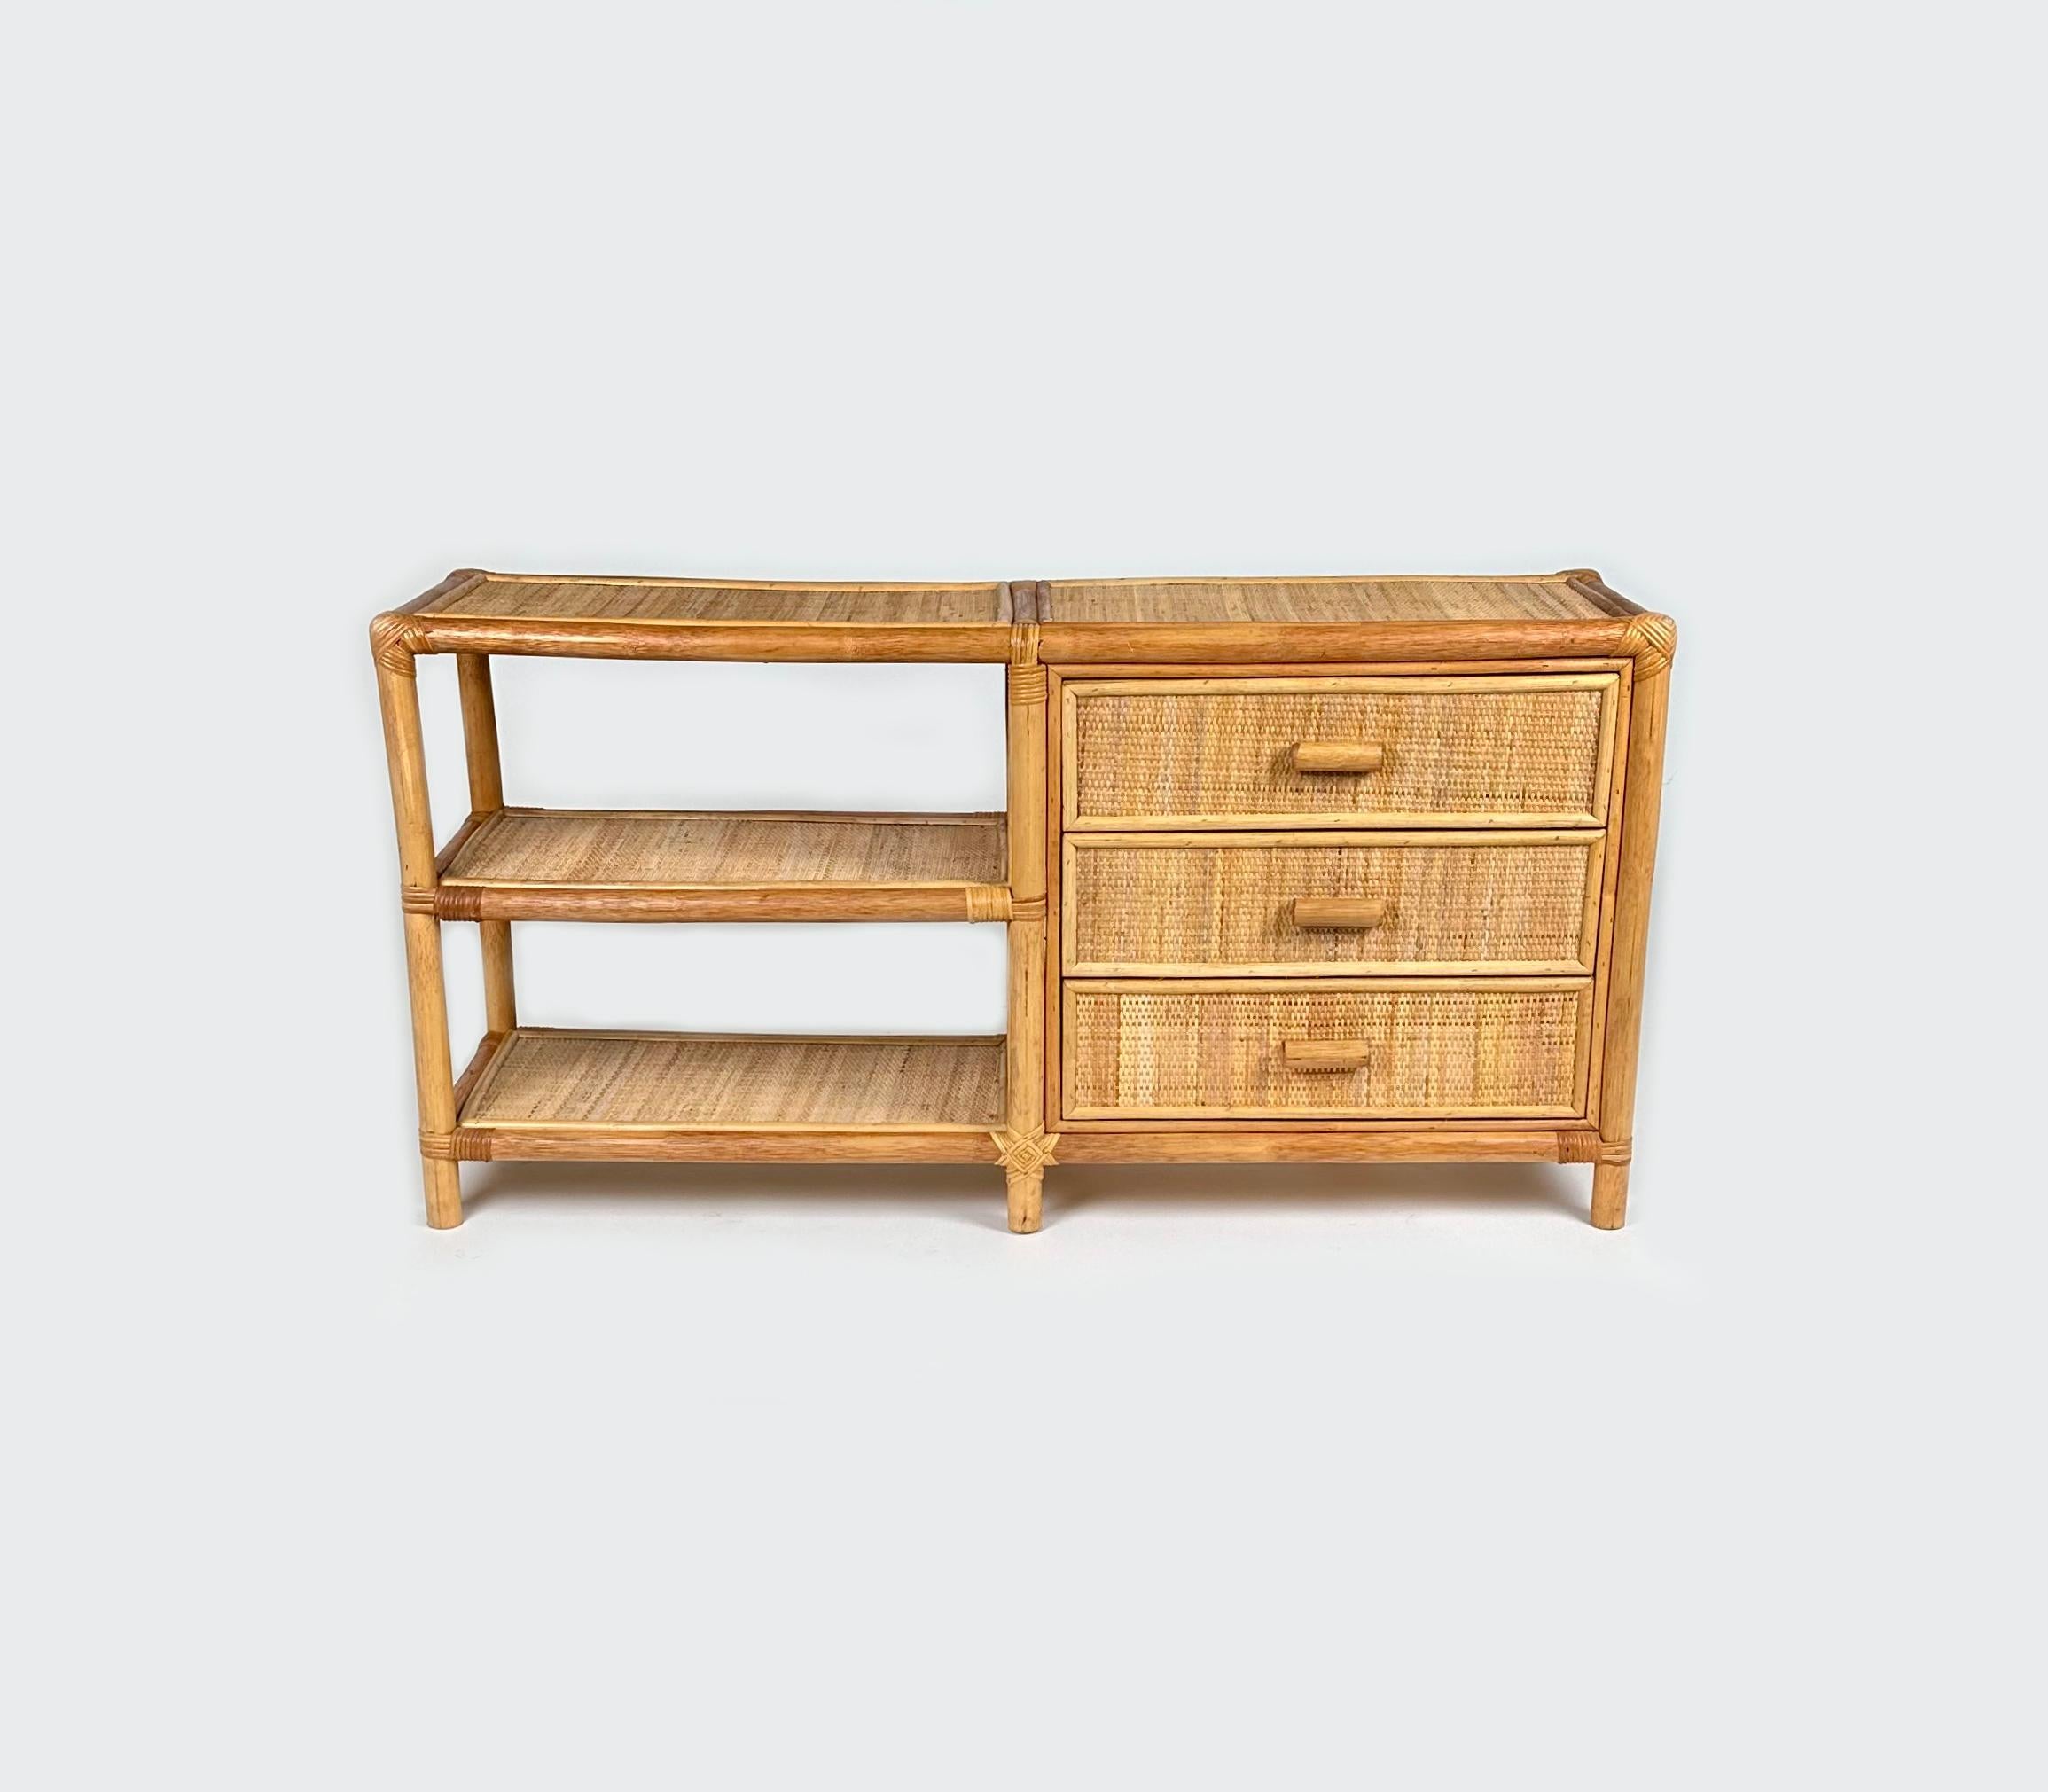 Rectangular sideboard in bamboo and rattan composed of three drawers with handles and three shelves. 

Made in Italy in the 1970s.